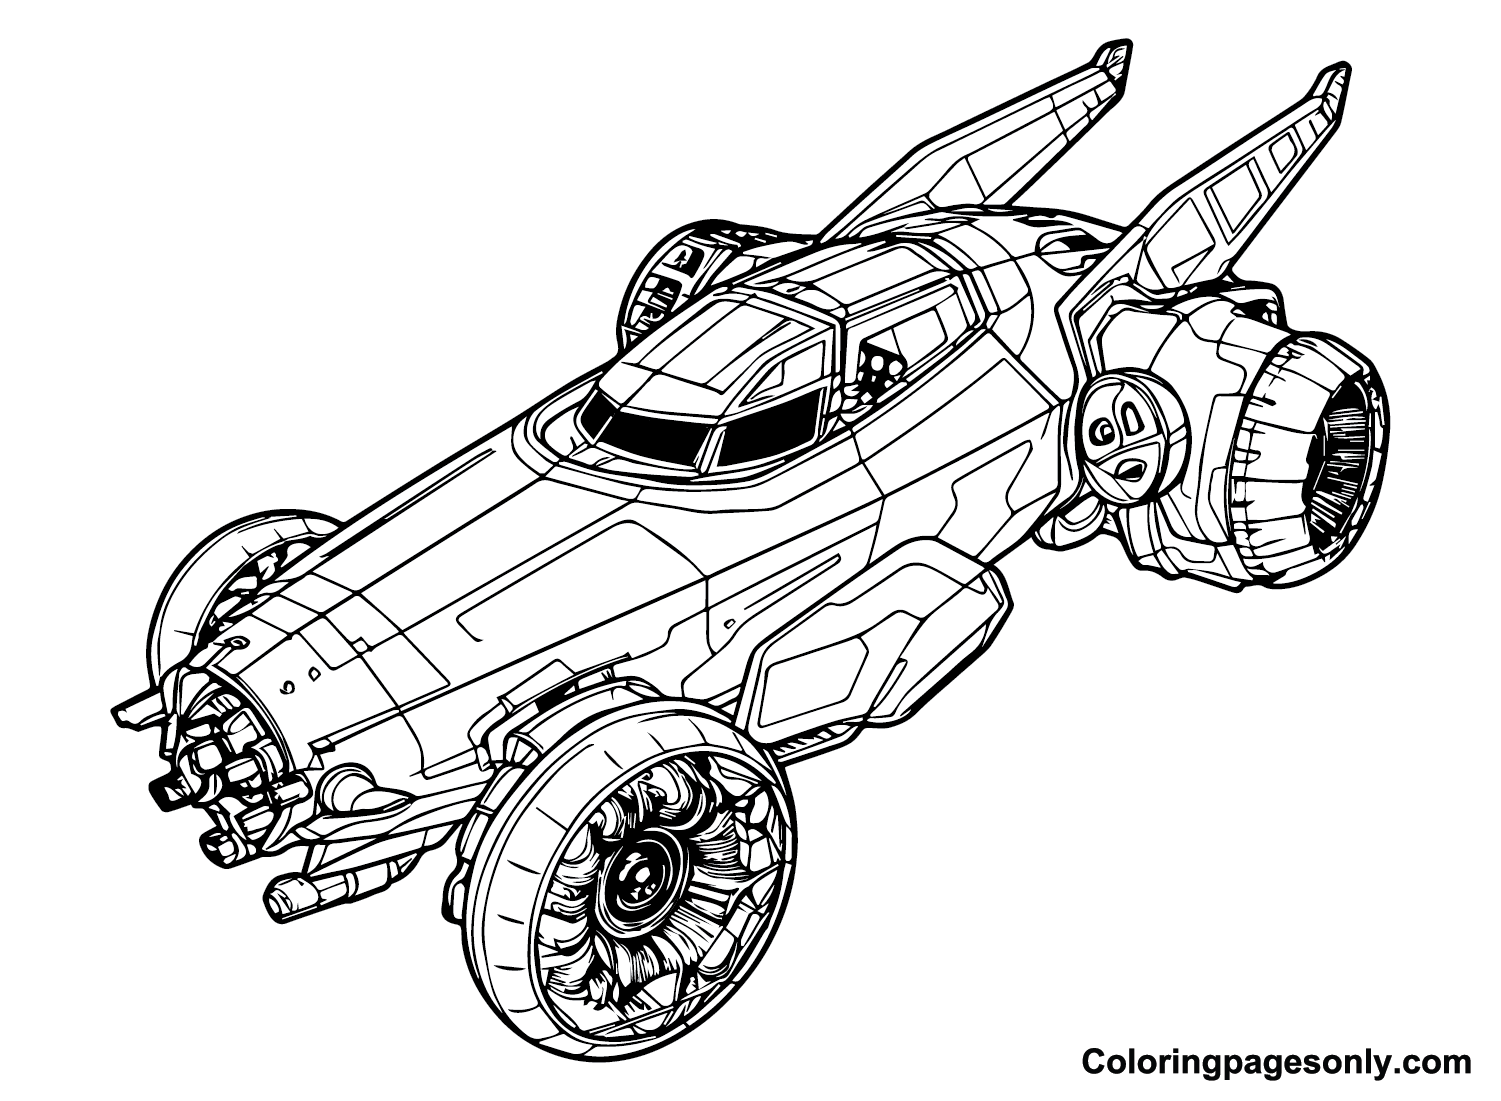 Rocket League Coloring Pages Printable for Free Download